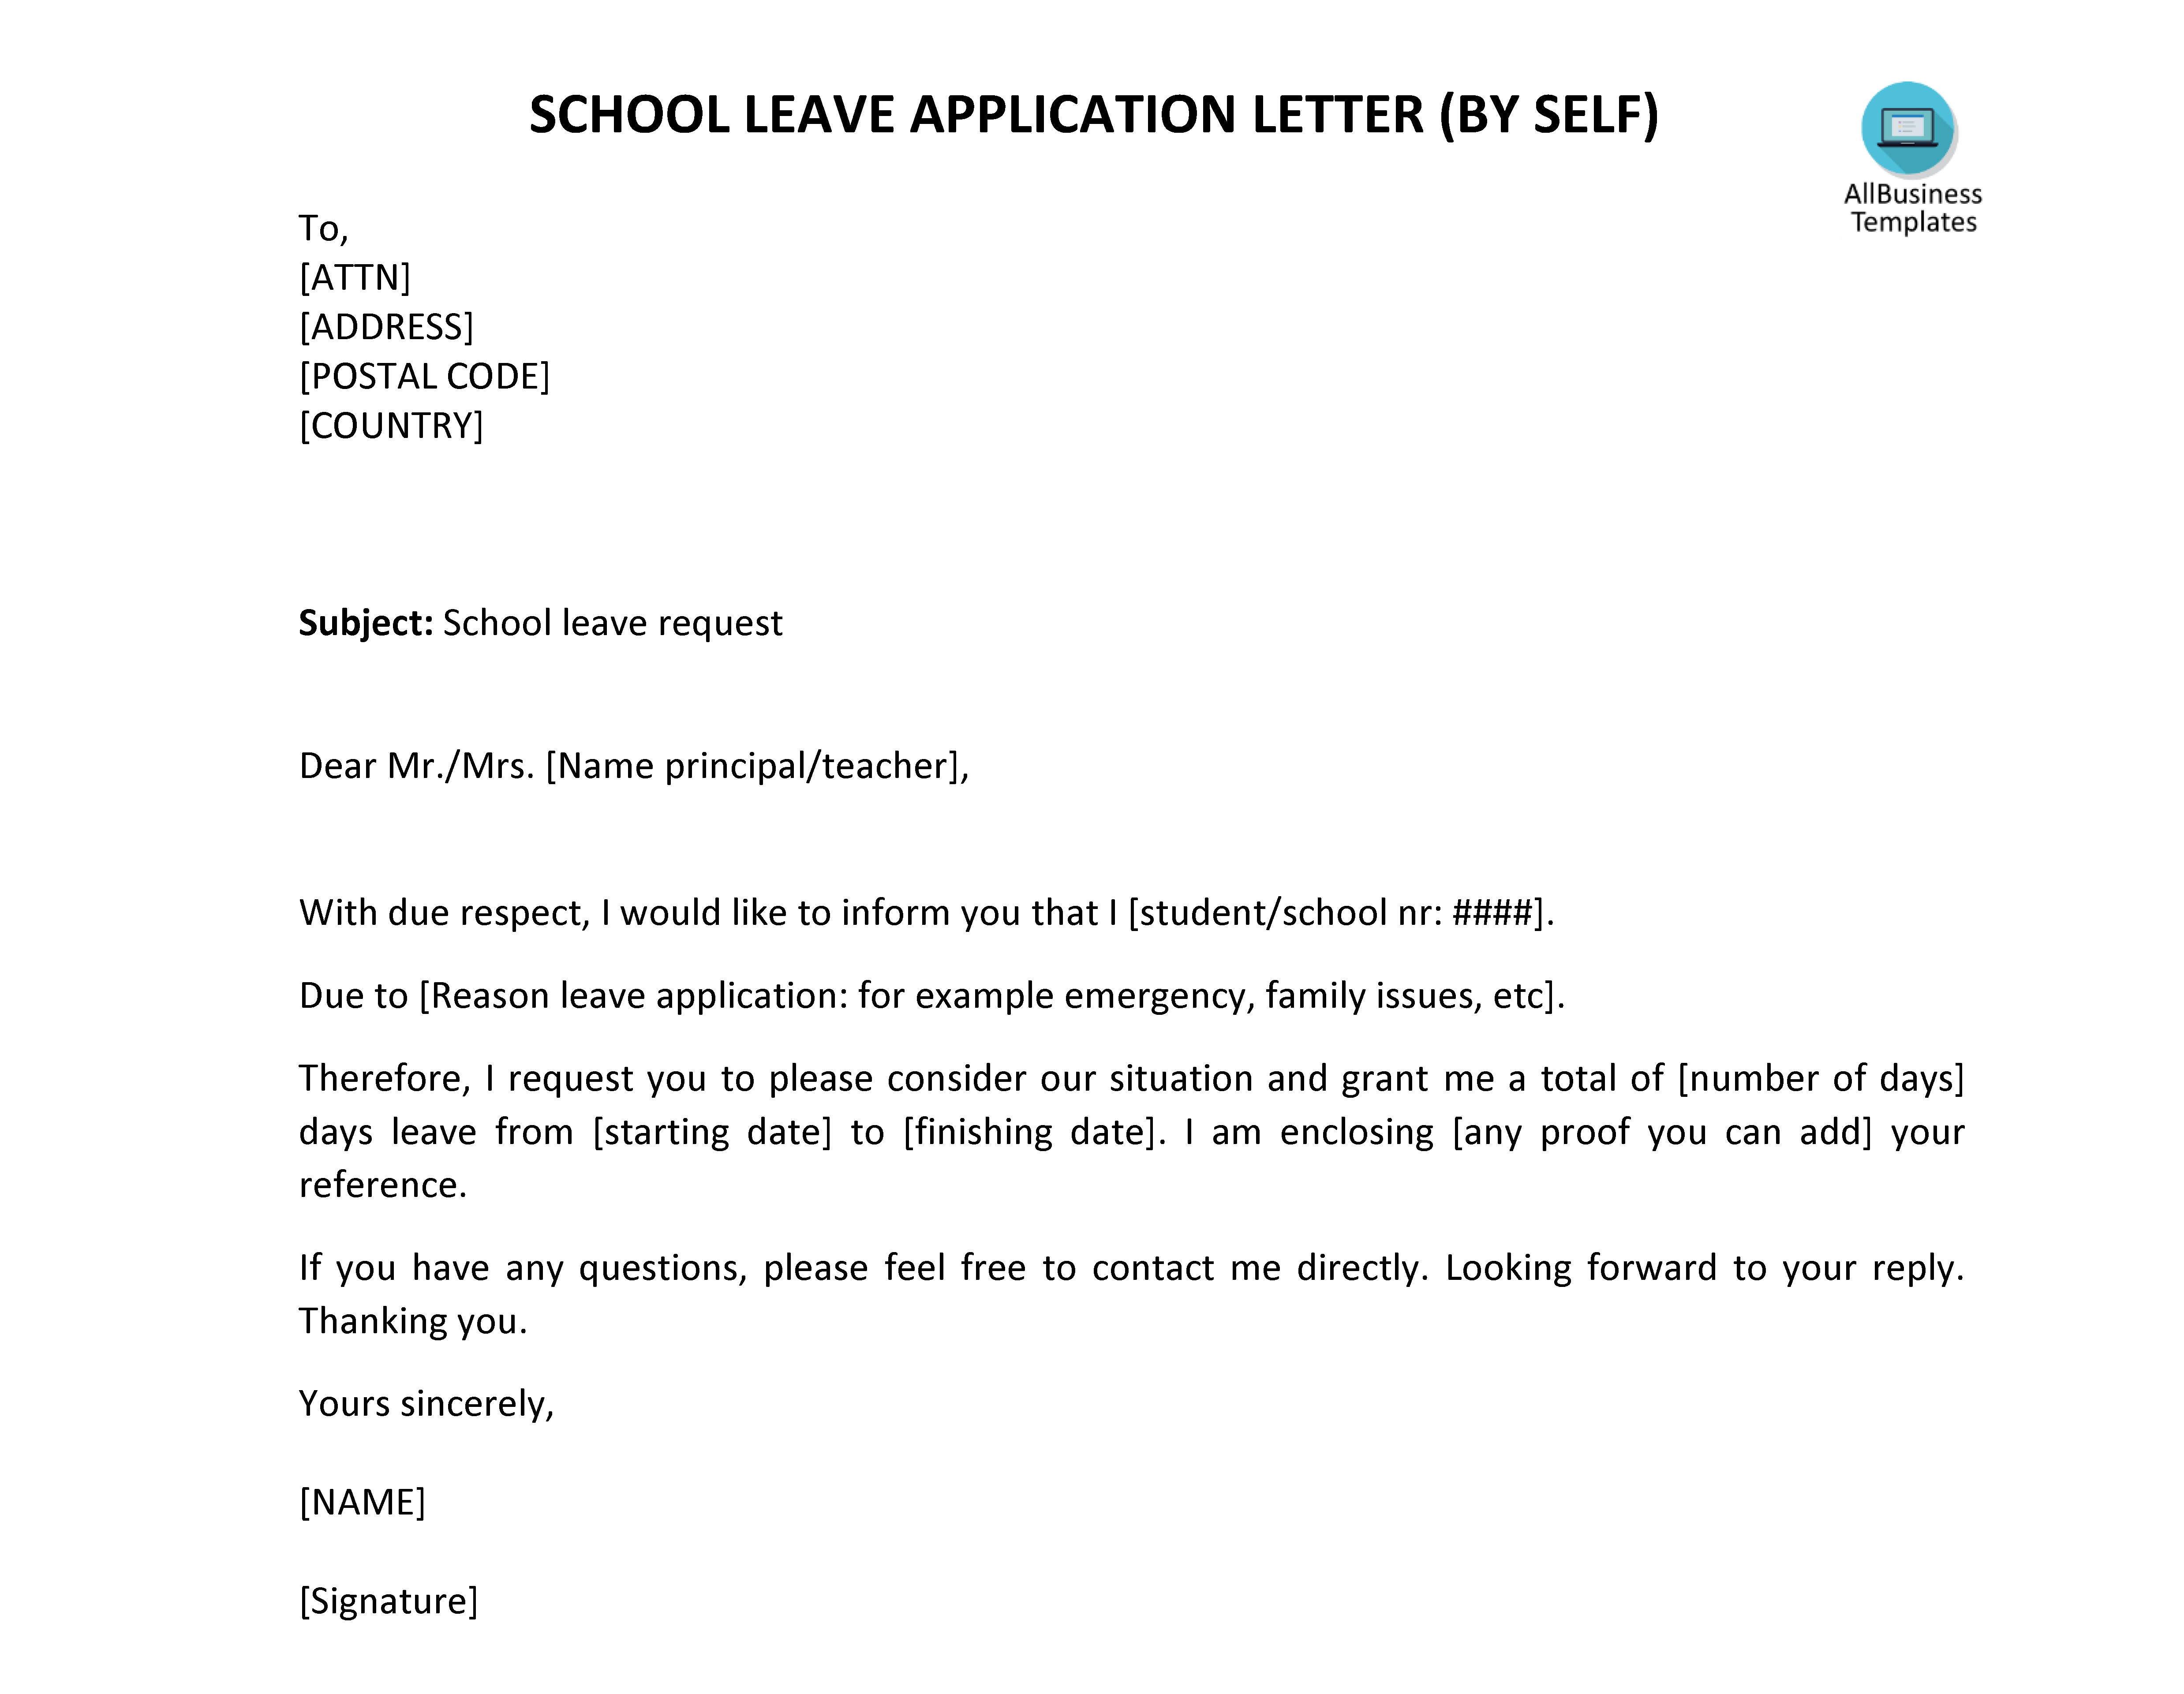 sample of application letter for casual leave